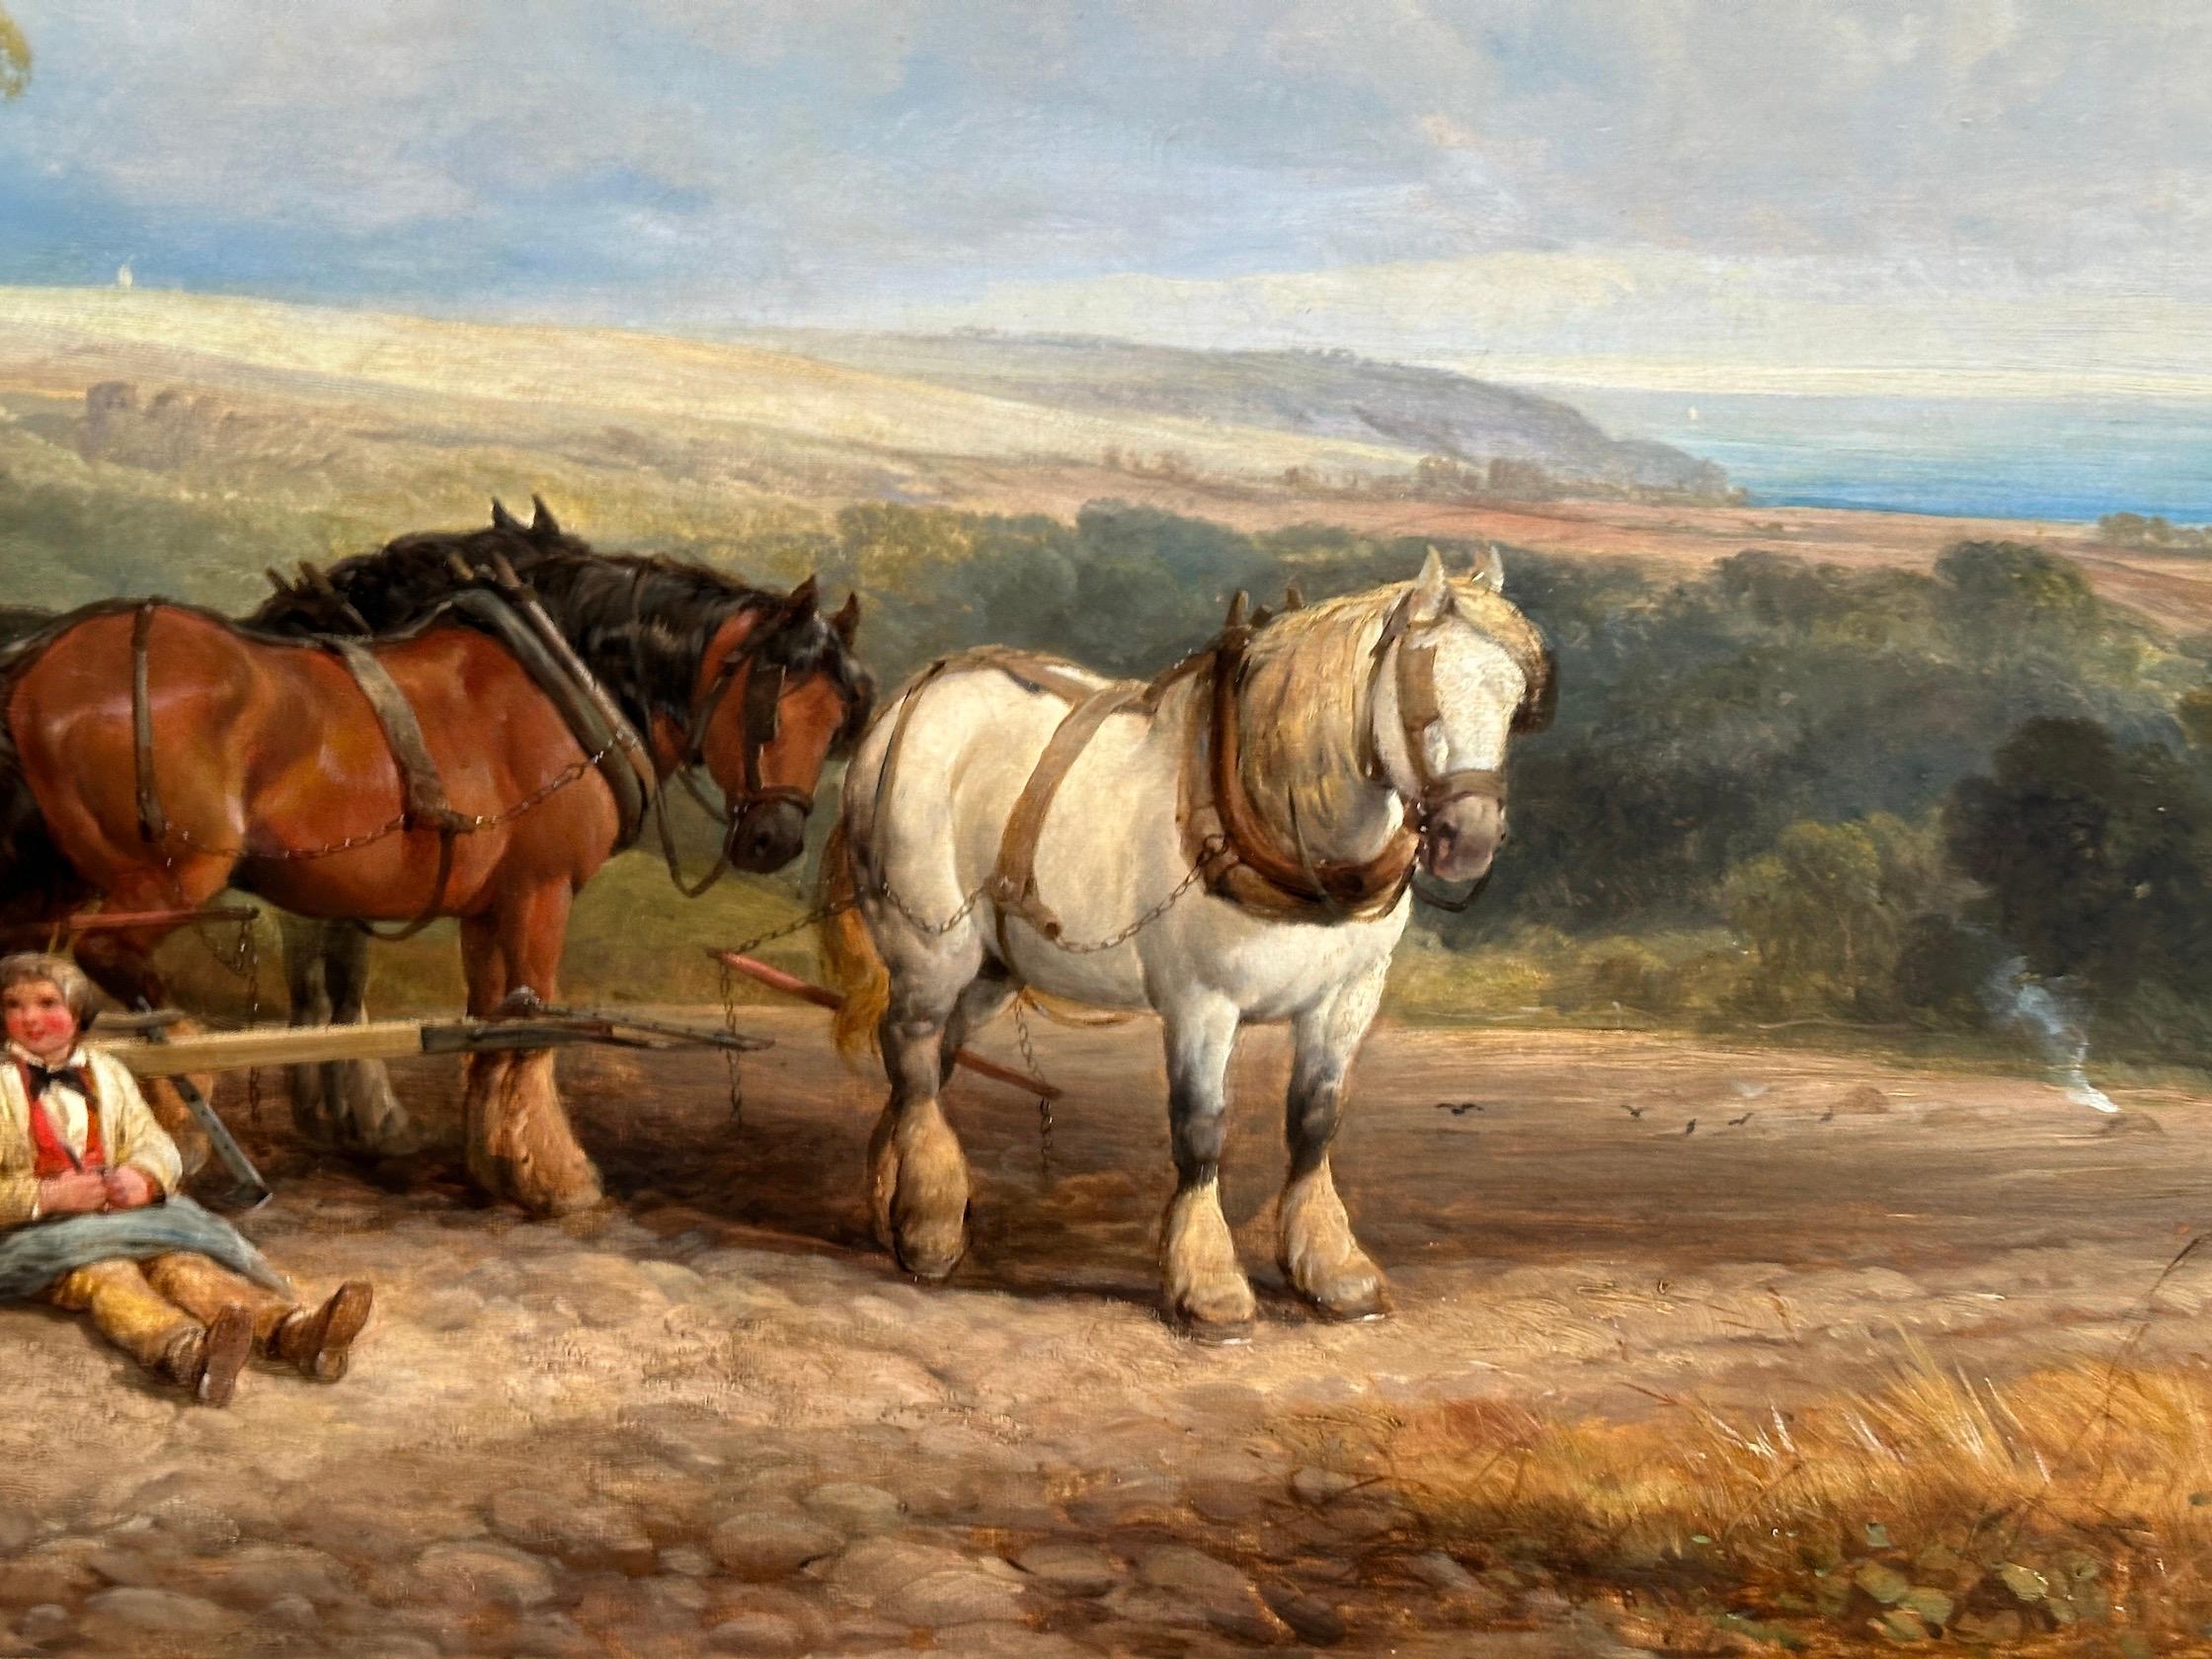 Henry Brittian Willis

English plough team at rest during harvest Summertime.

A painting by Henry Brittiam Willis capturing a 19th-century English plough team, complete with horses, farmers, and their children, set against an expansive landscape